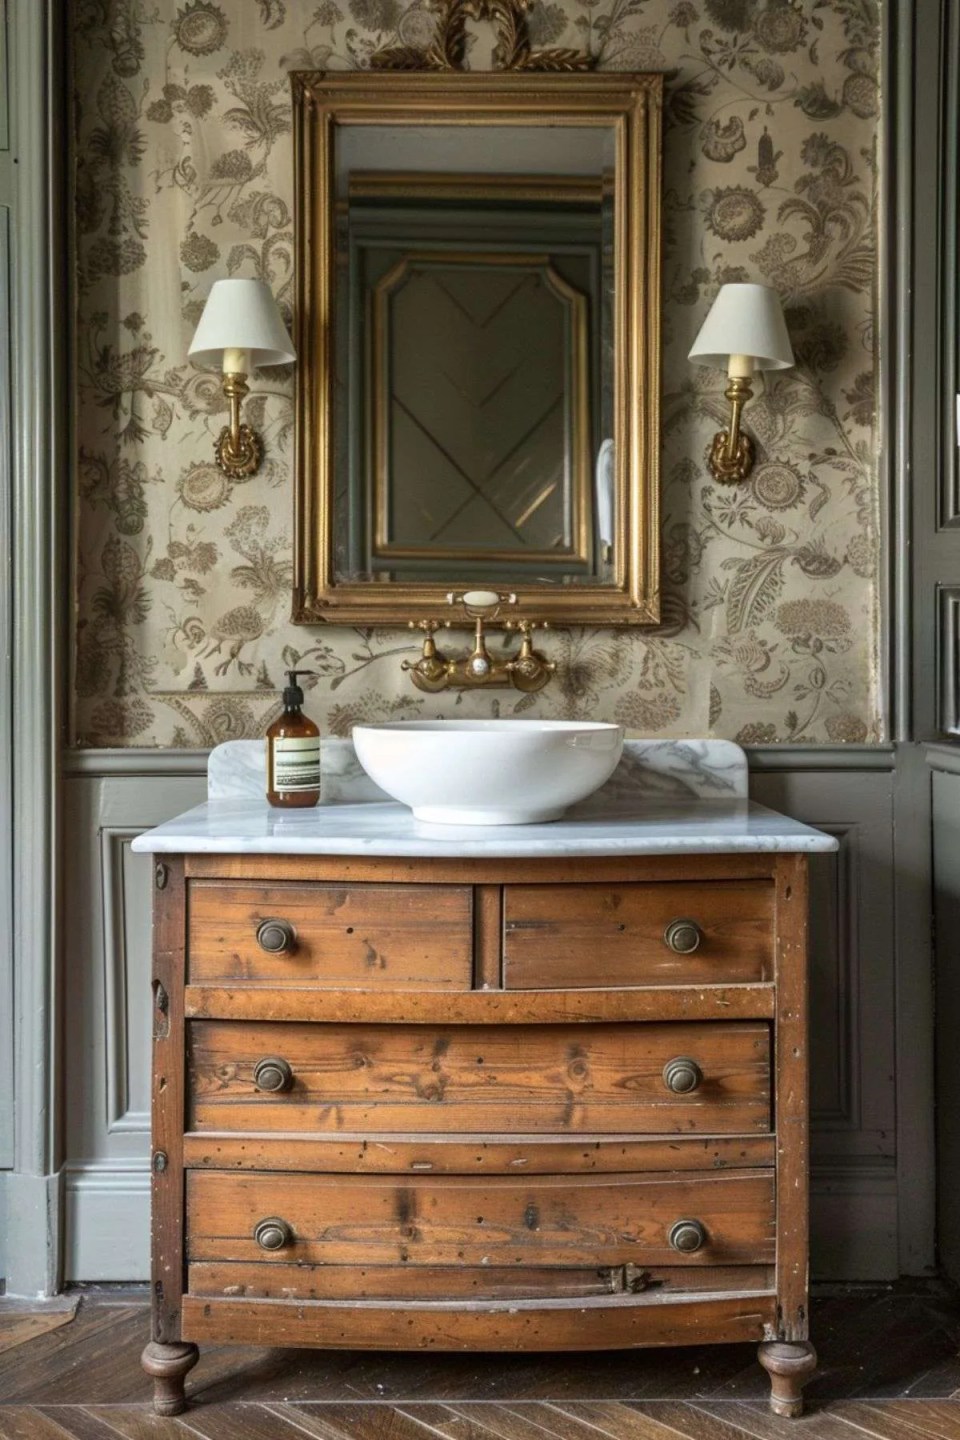 a rustic chest of drawers with a marble top and sink, vintage wallpaper and a gold ornate mirror